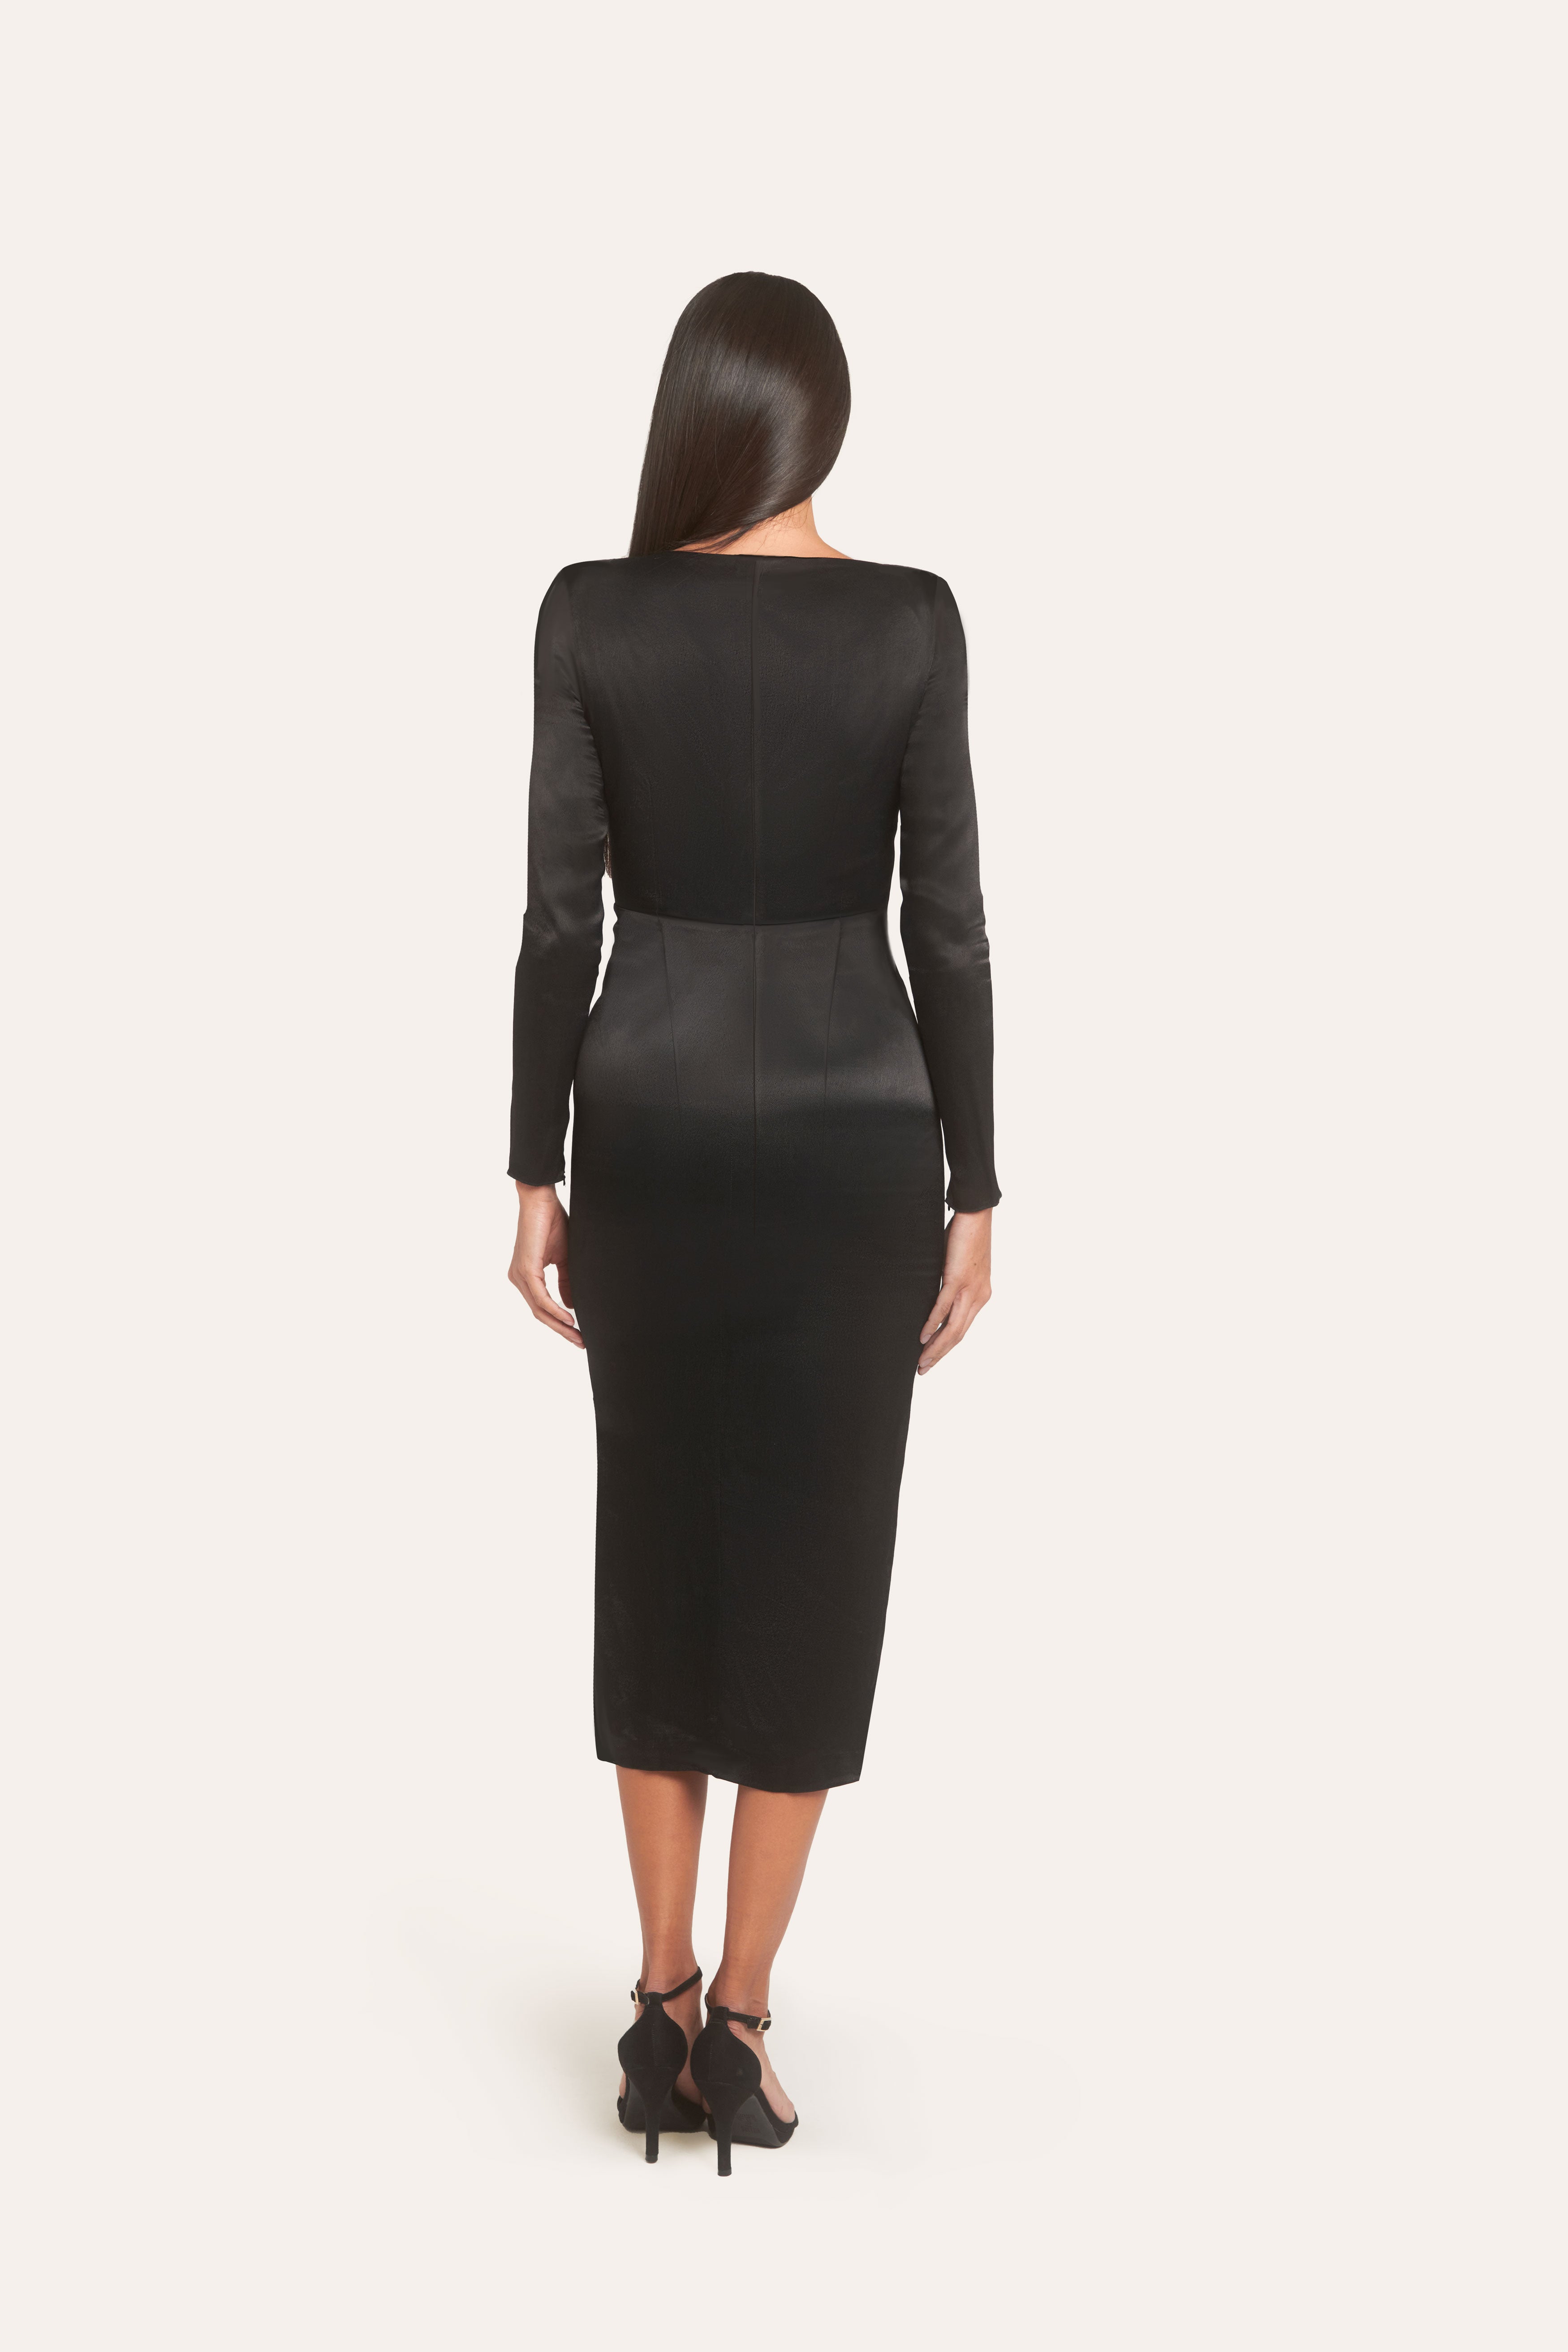 Black midi long-sleeved fitted dress